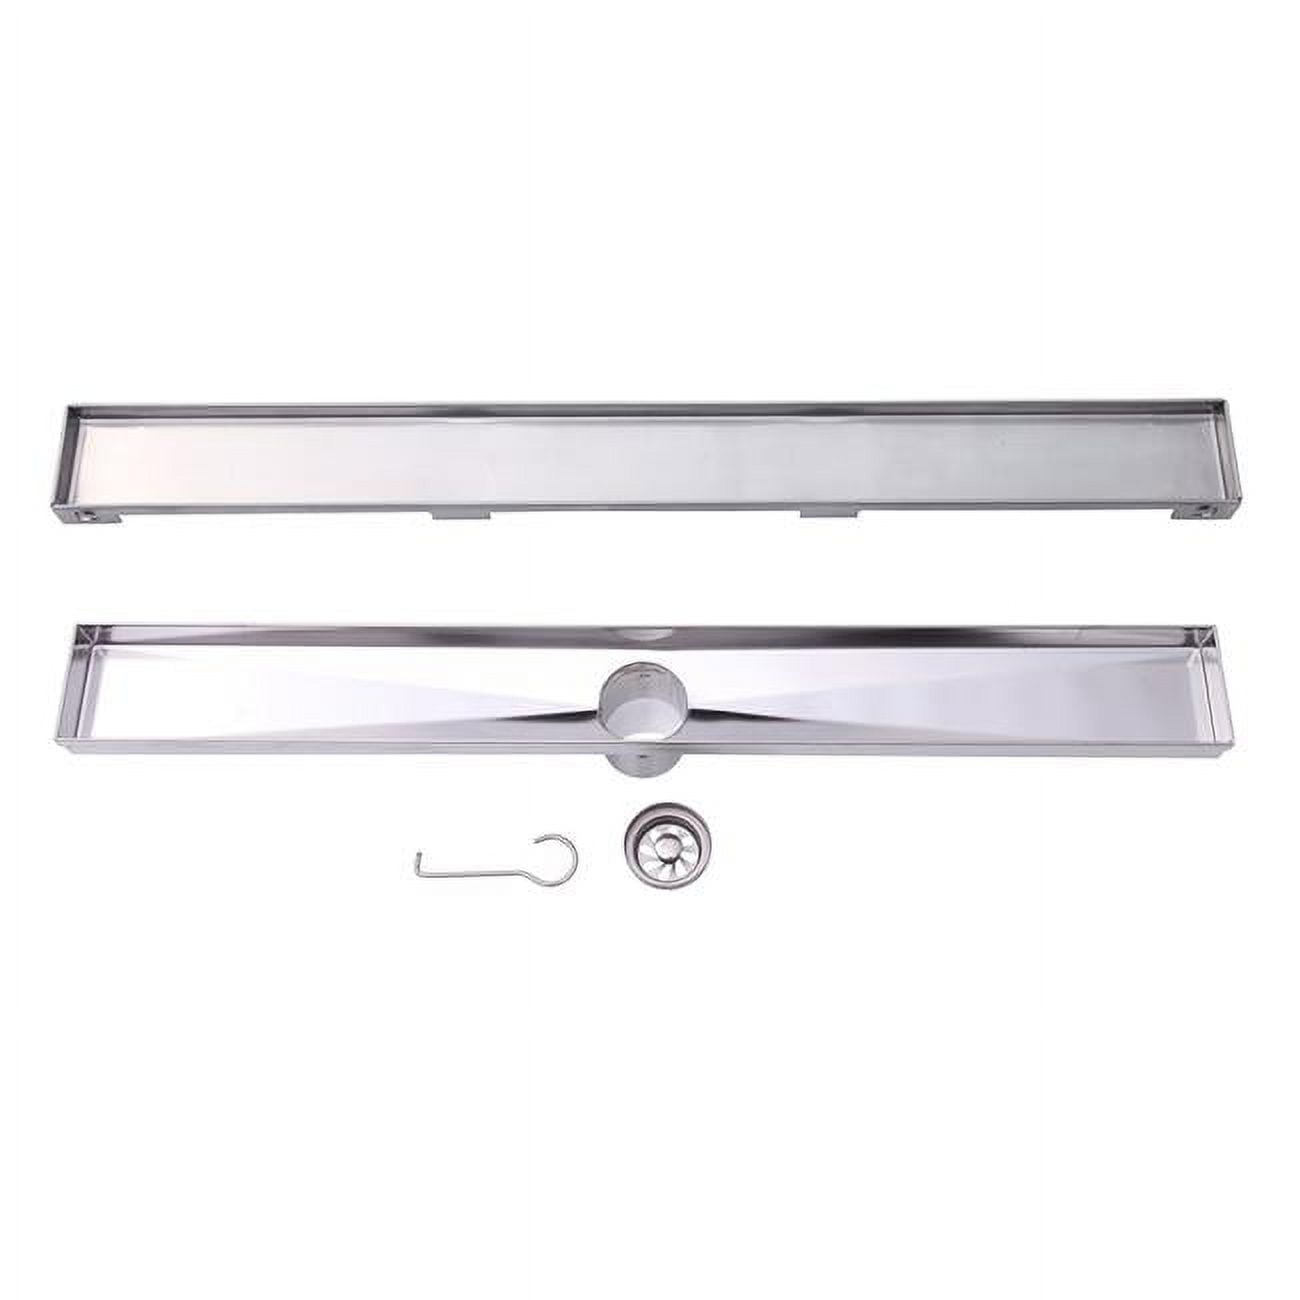 Modern Hole Design Stainless Steel Linear Drain - 36 In.